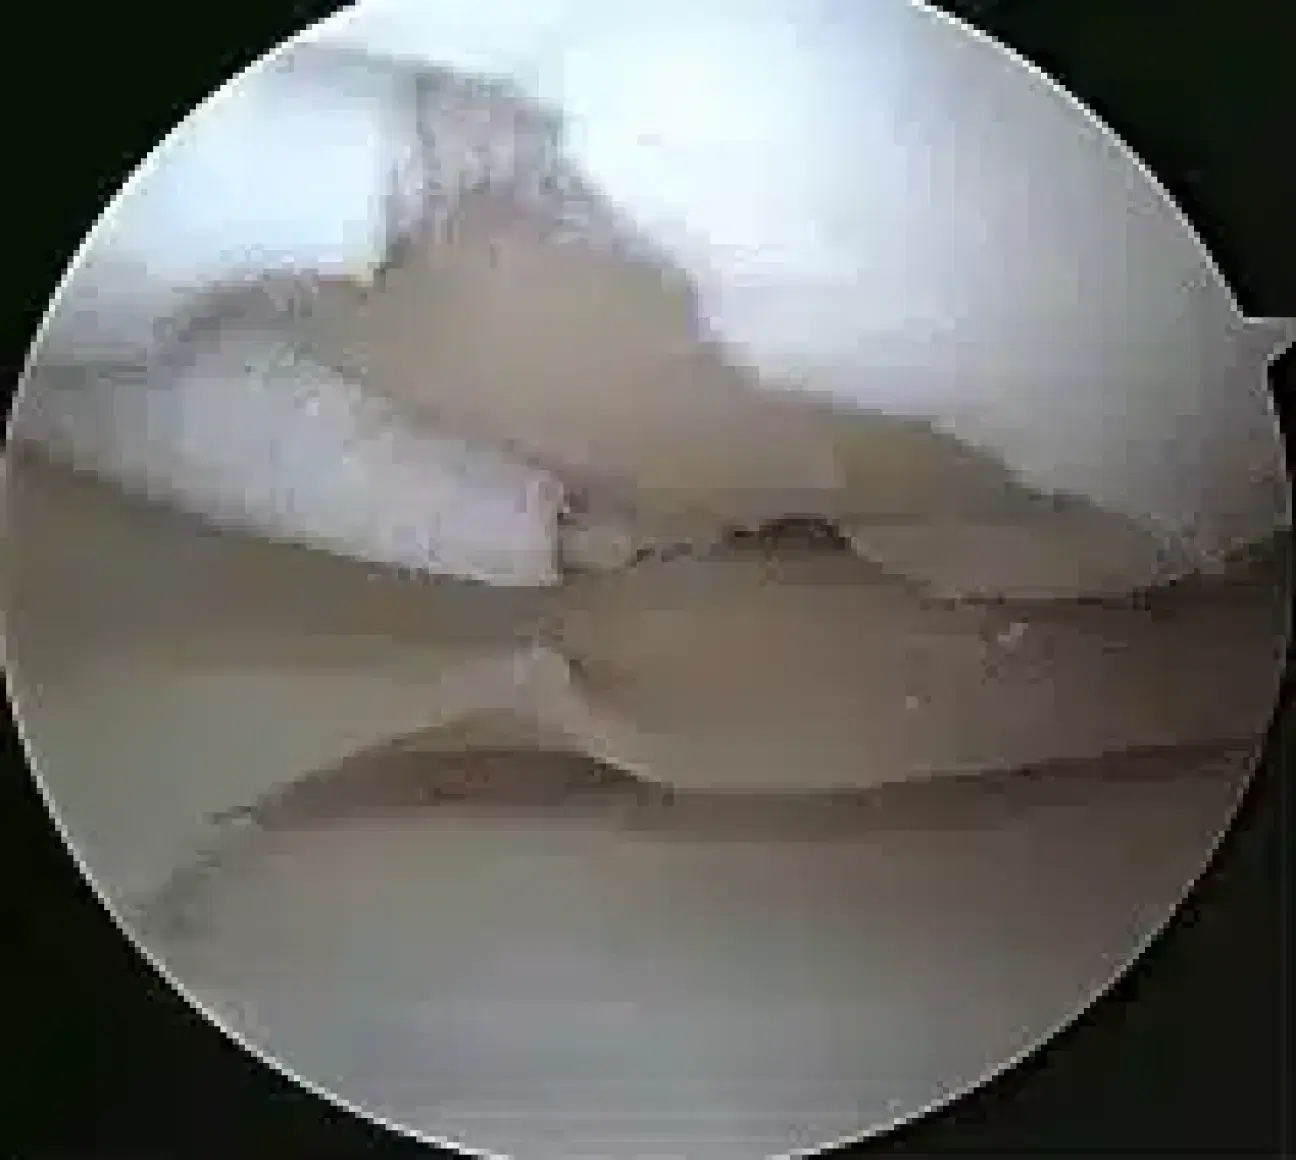 microfracture picture 1